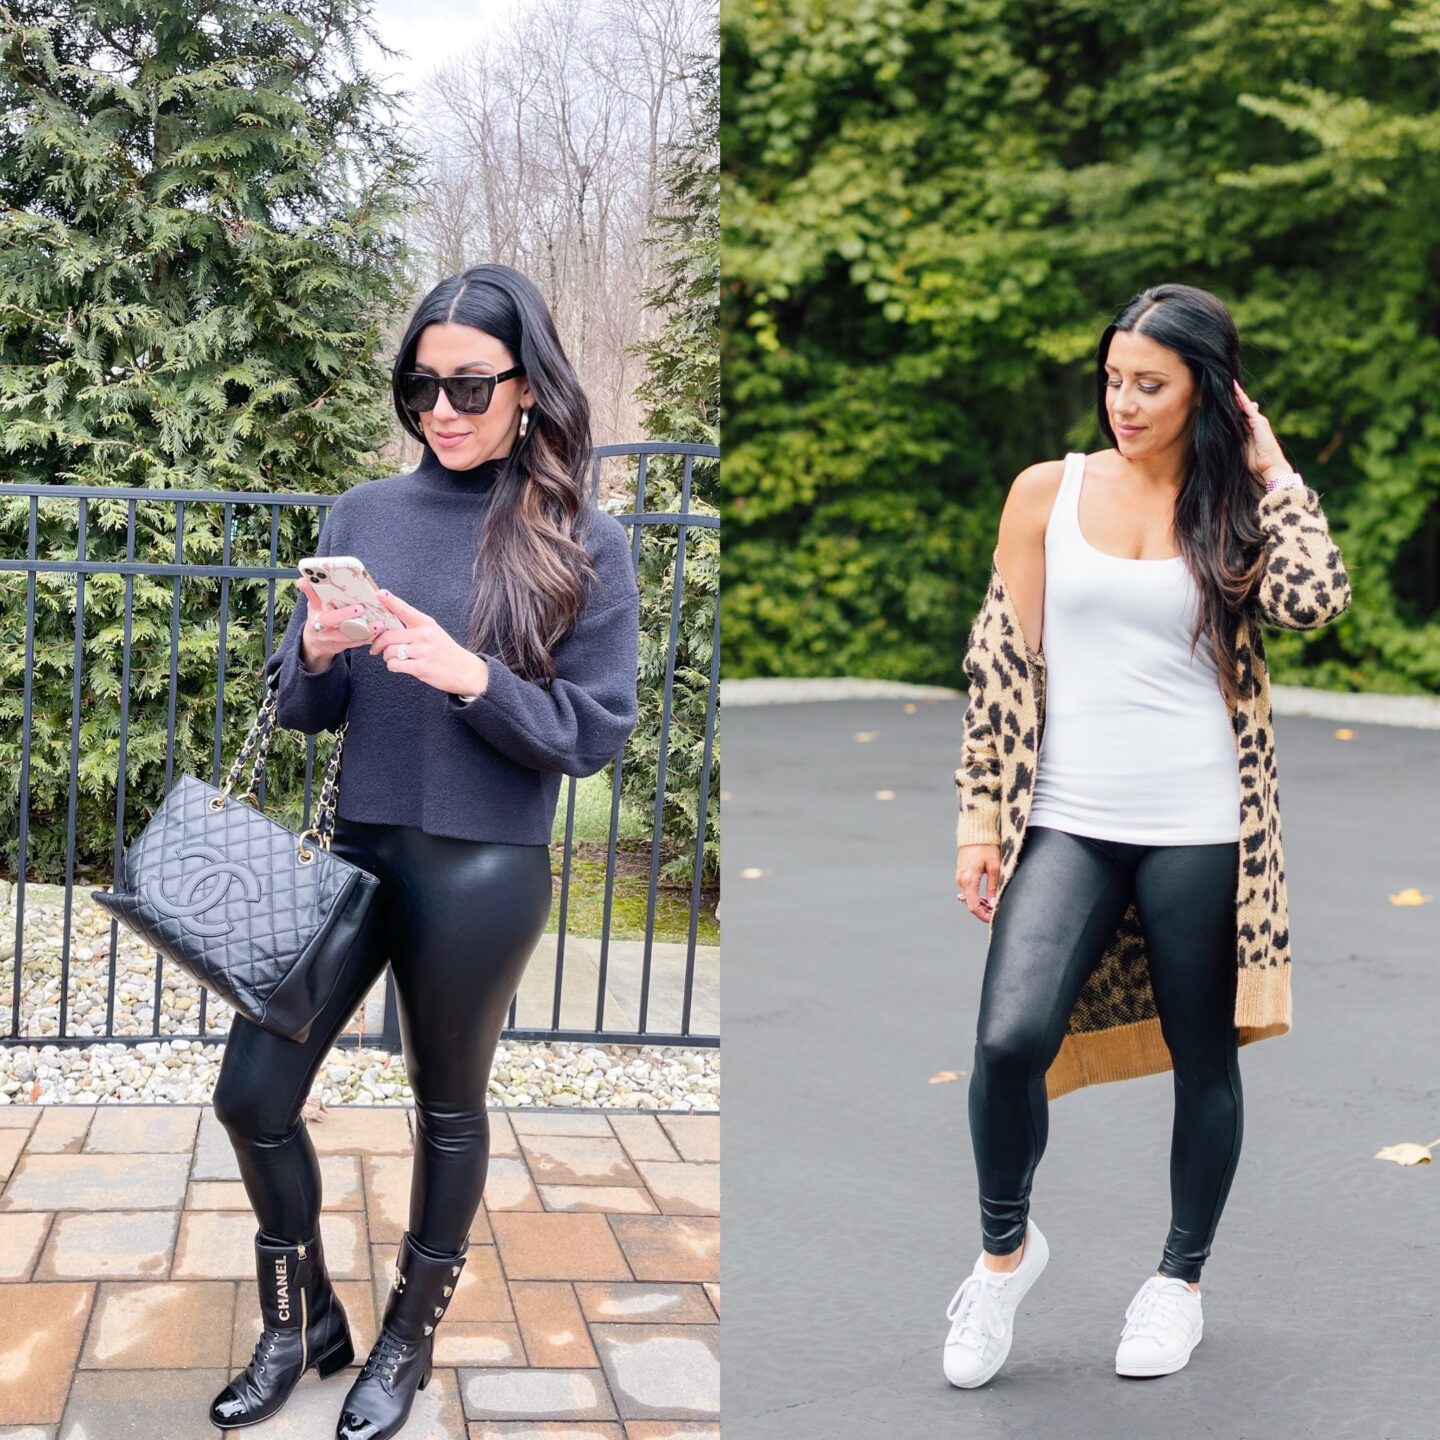 LOOK FOR LESS: The Best Spanx Leather Legging DUPE